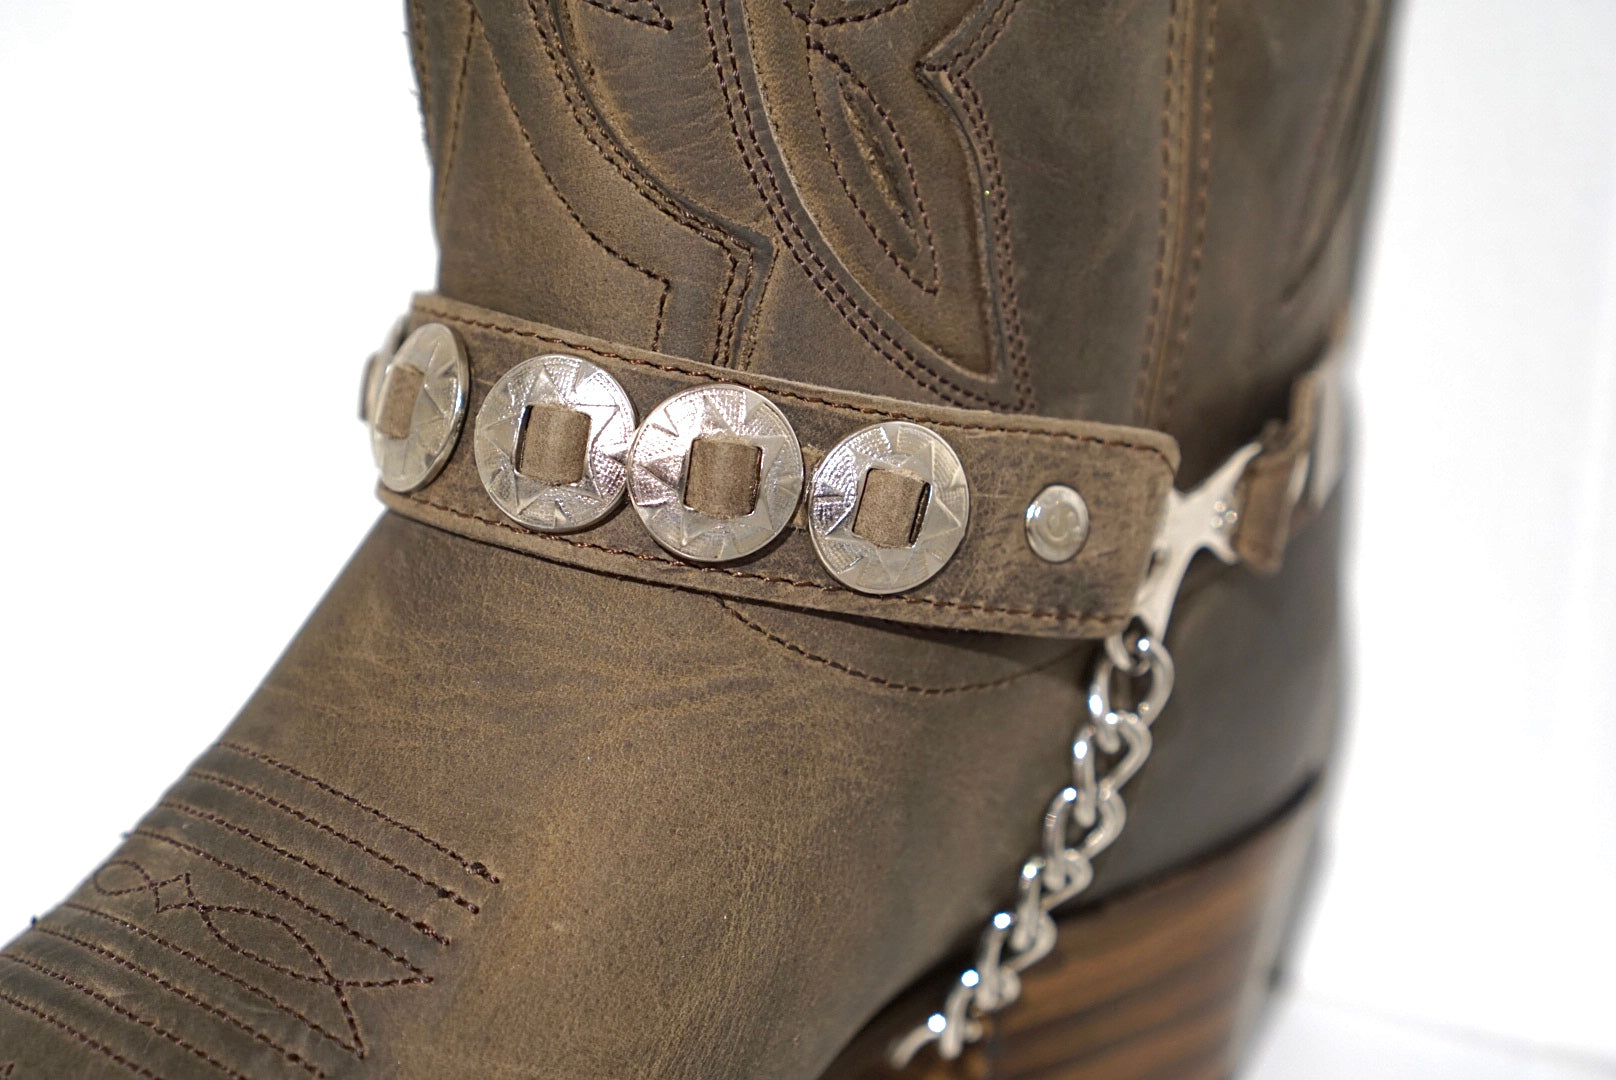 Sendra spurs - taupe with silver circles/stars